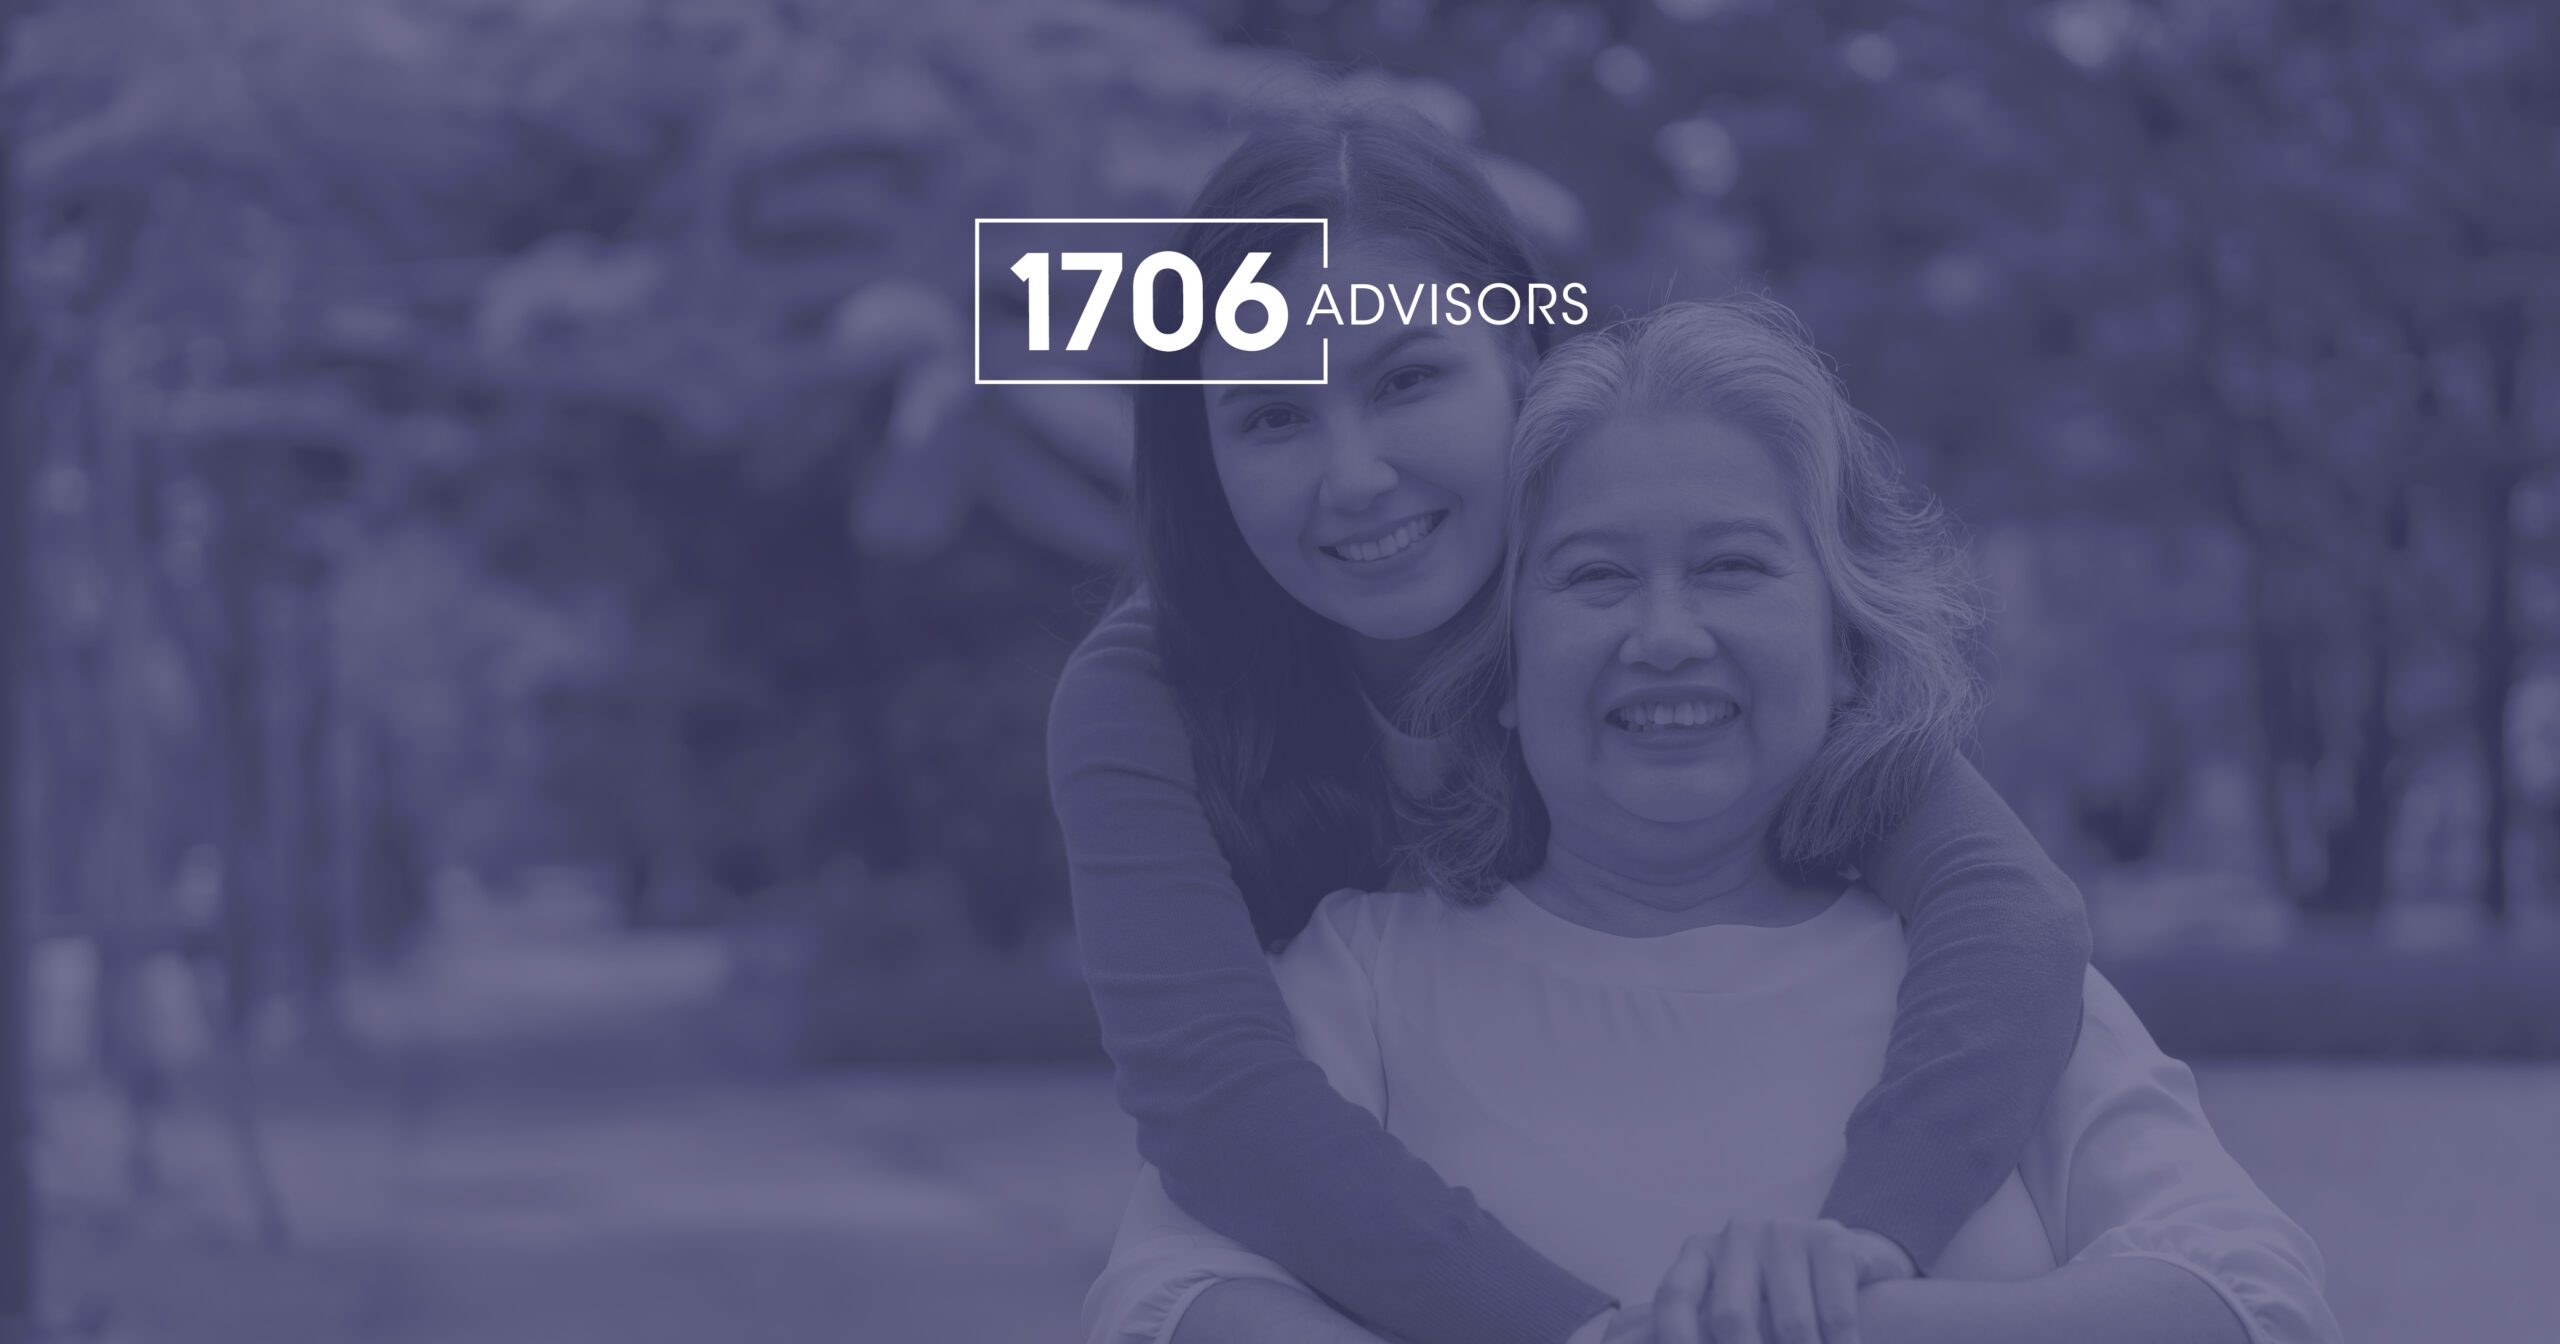 Caregiving: Why Everyone Should Consider the Possibility. Insights from 1706 Advisors